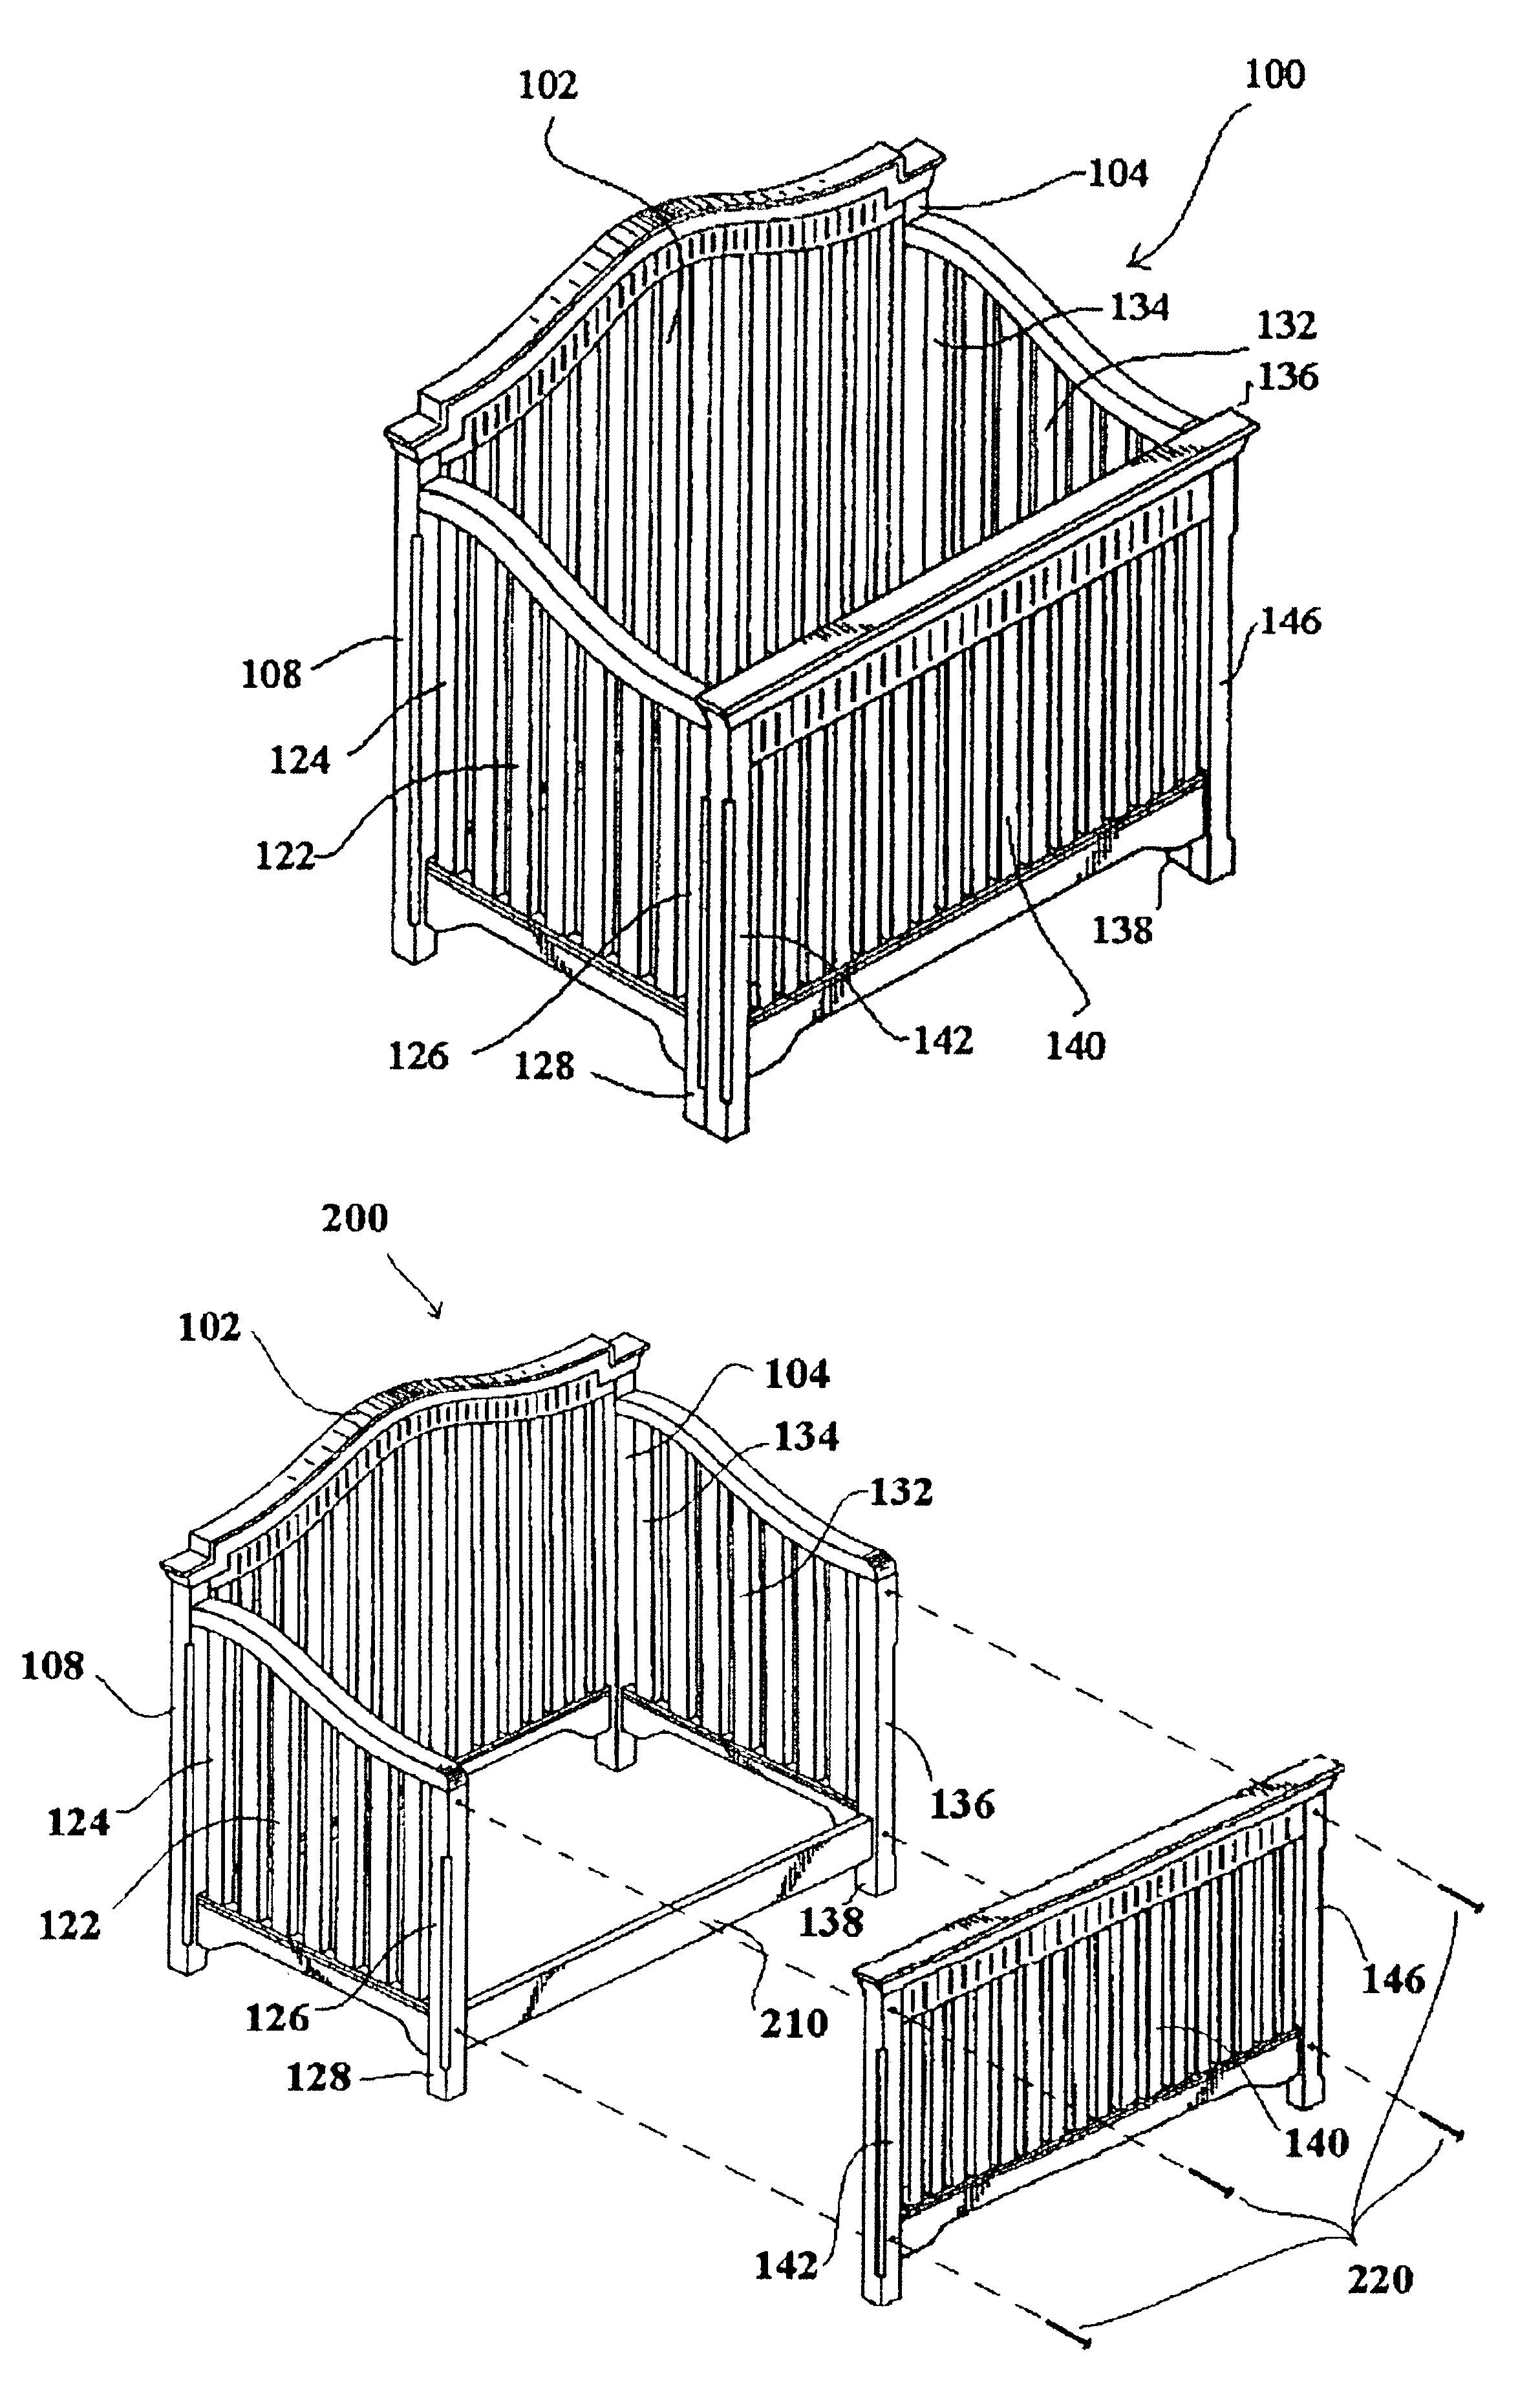 Convertible crib and bed arrangement